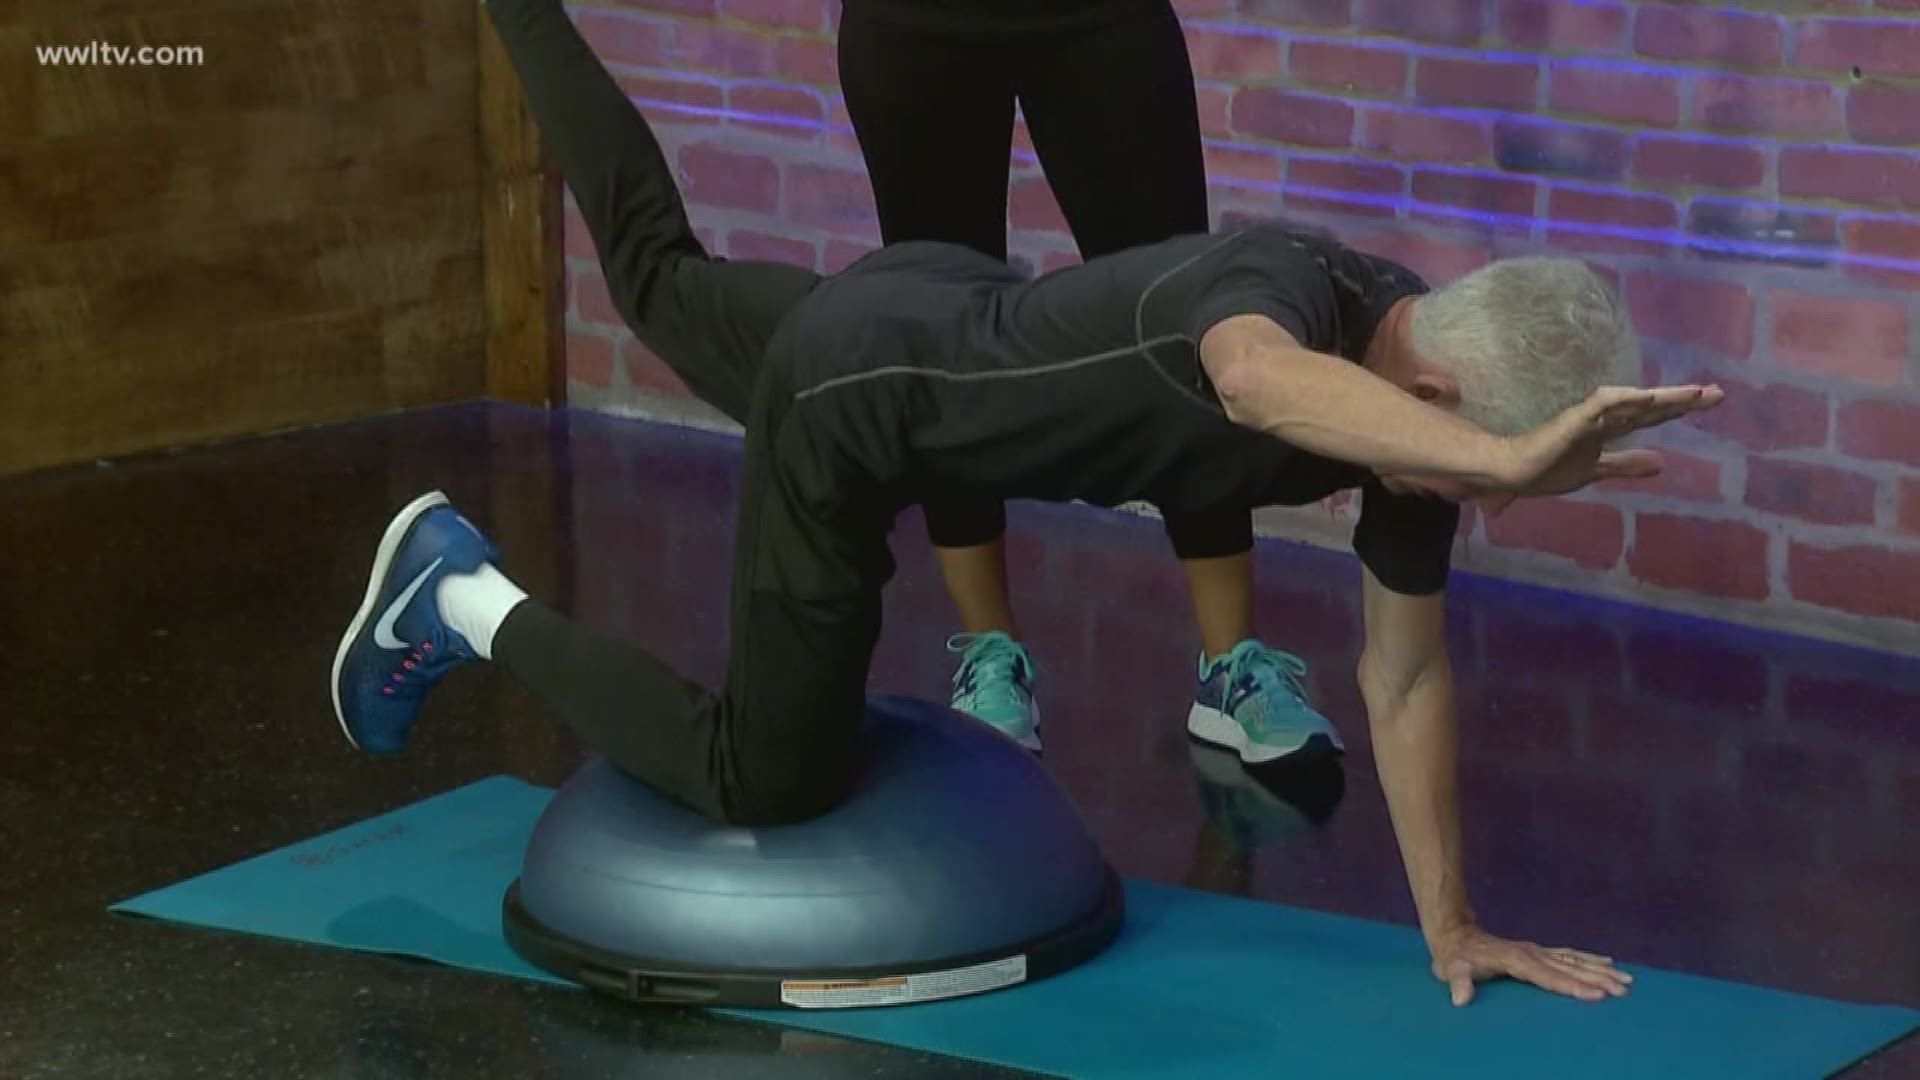 Fitness expert Mackie Shilstone is here to show us an exercise to streamline our bodies. 